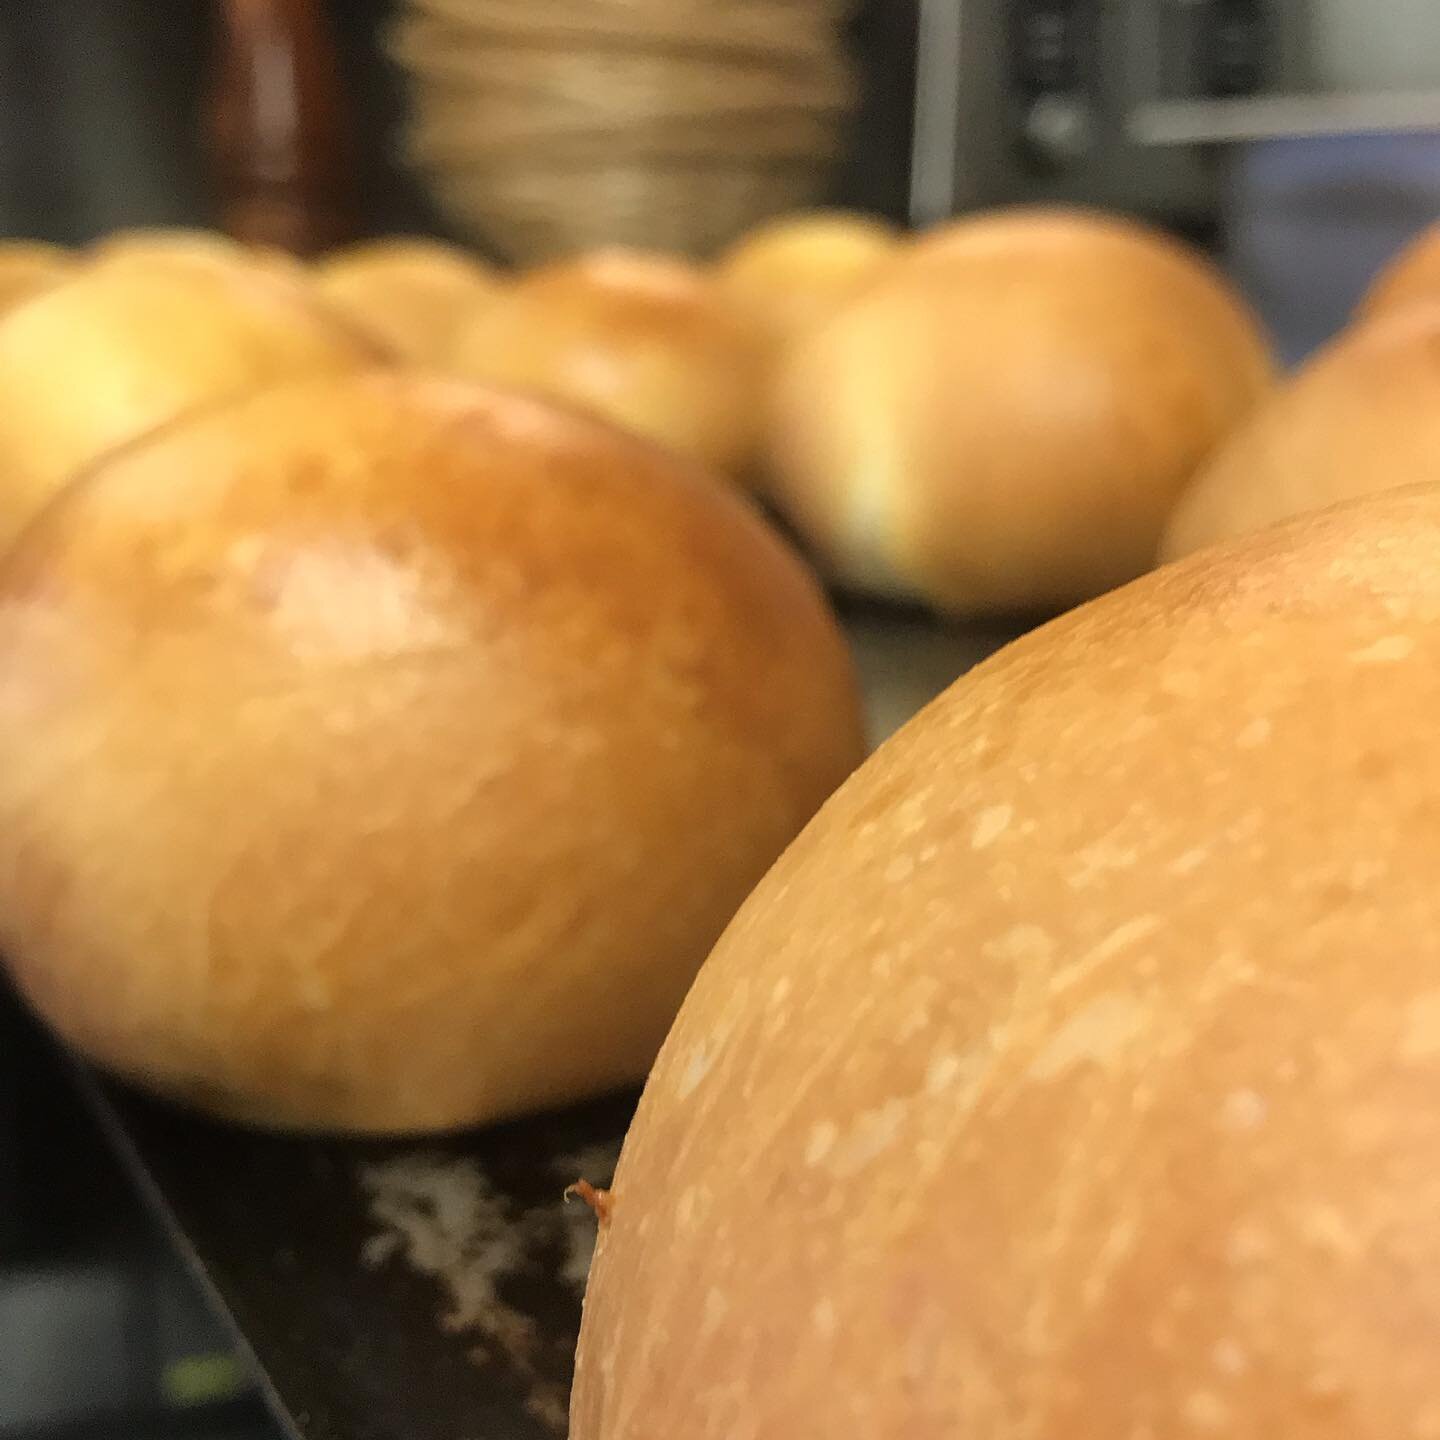 Brioche are out of the oven and ready for your royales, Benedicts and hunters breakfasts.
See you soon.
#mrsbs #breakfast